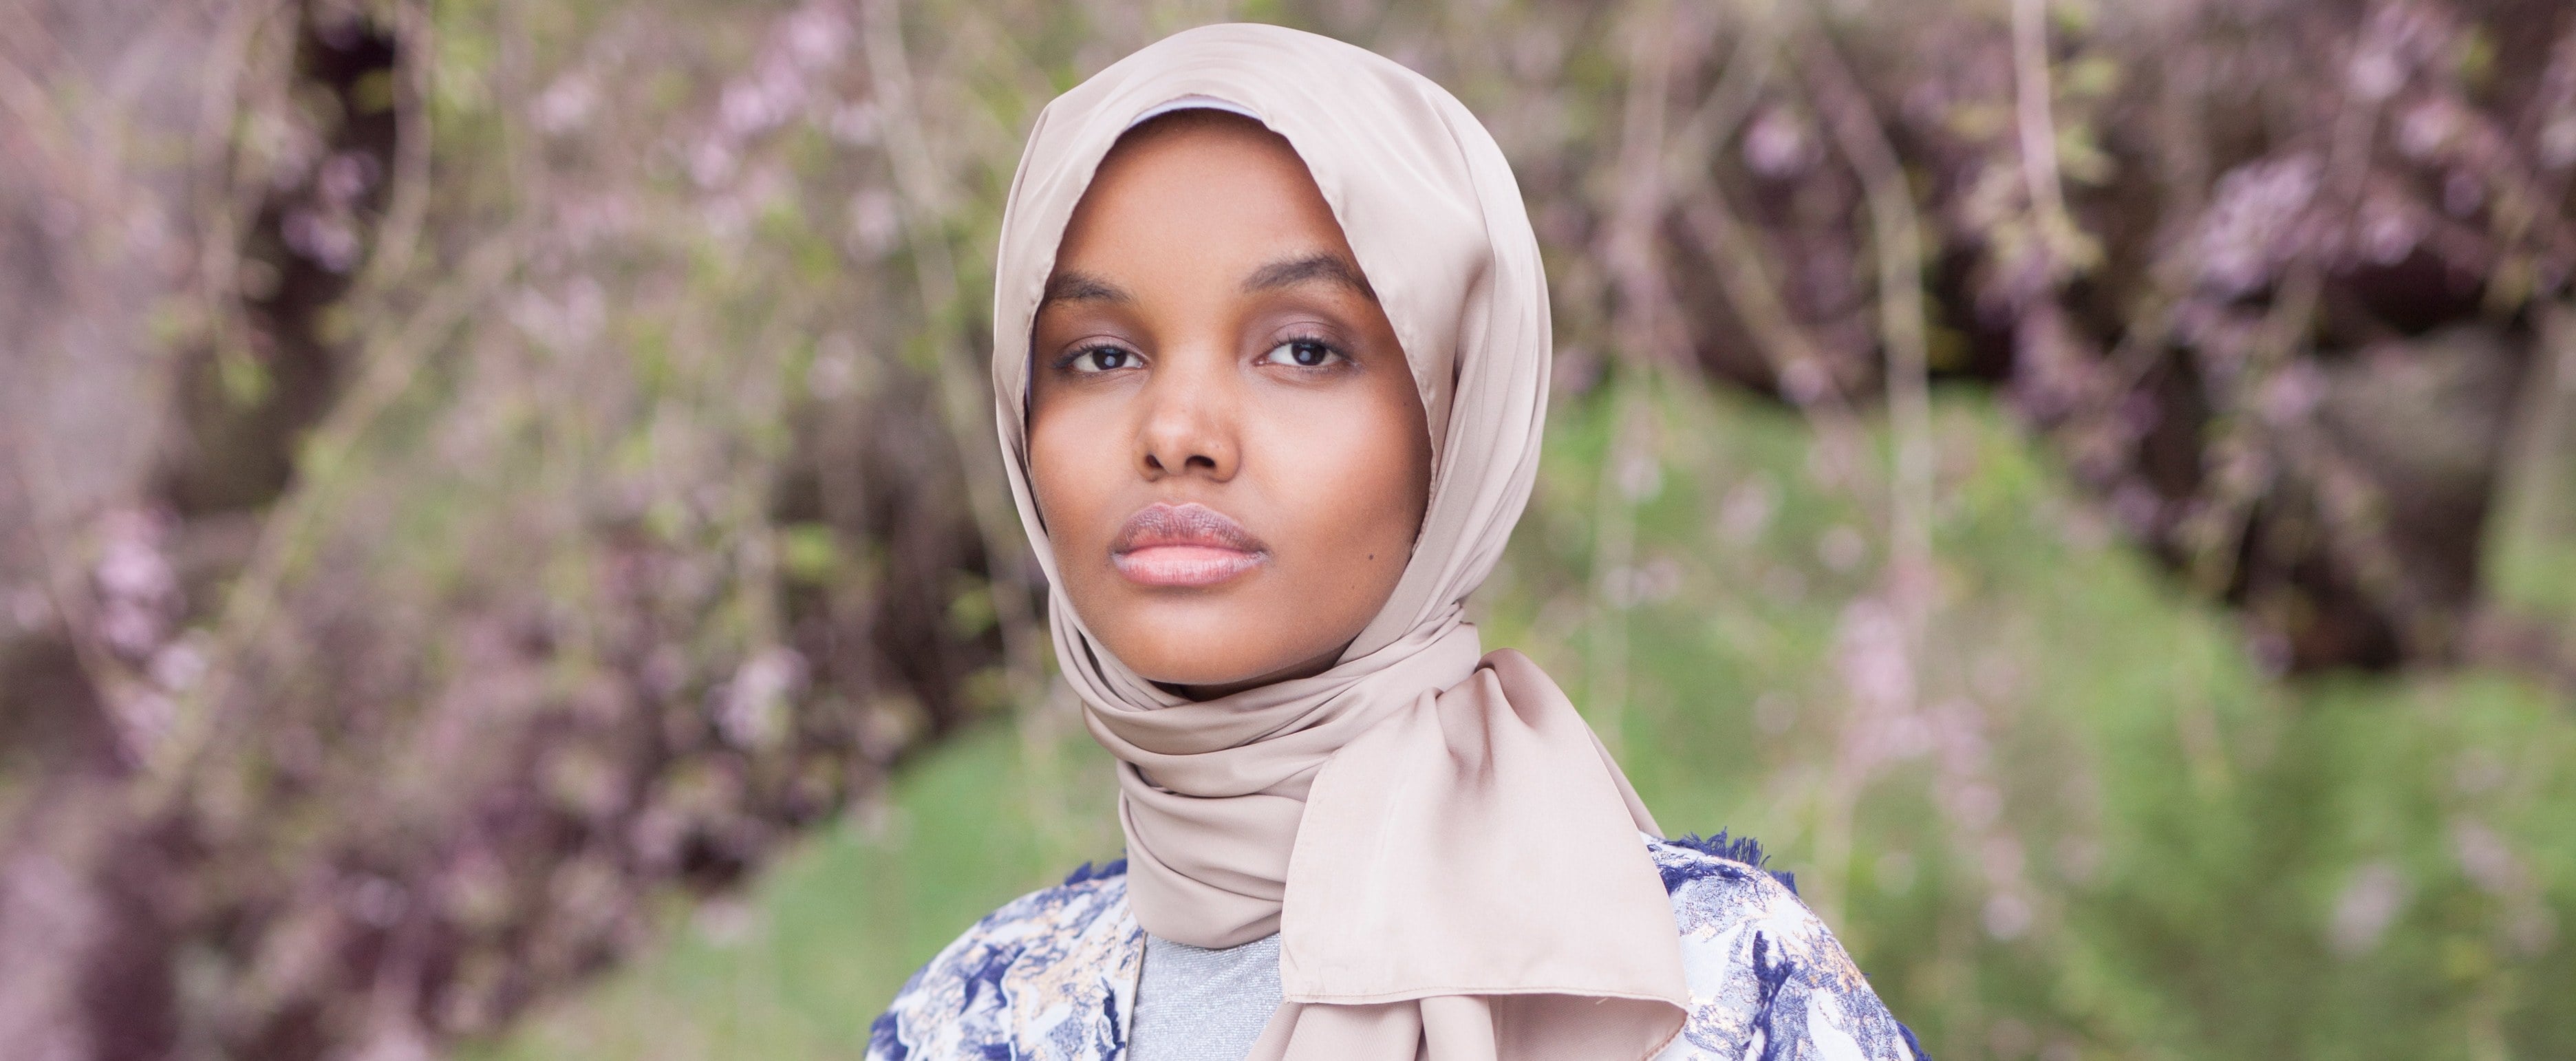 As the hijabi market grows, designers turn their attention to modest  activewear